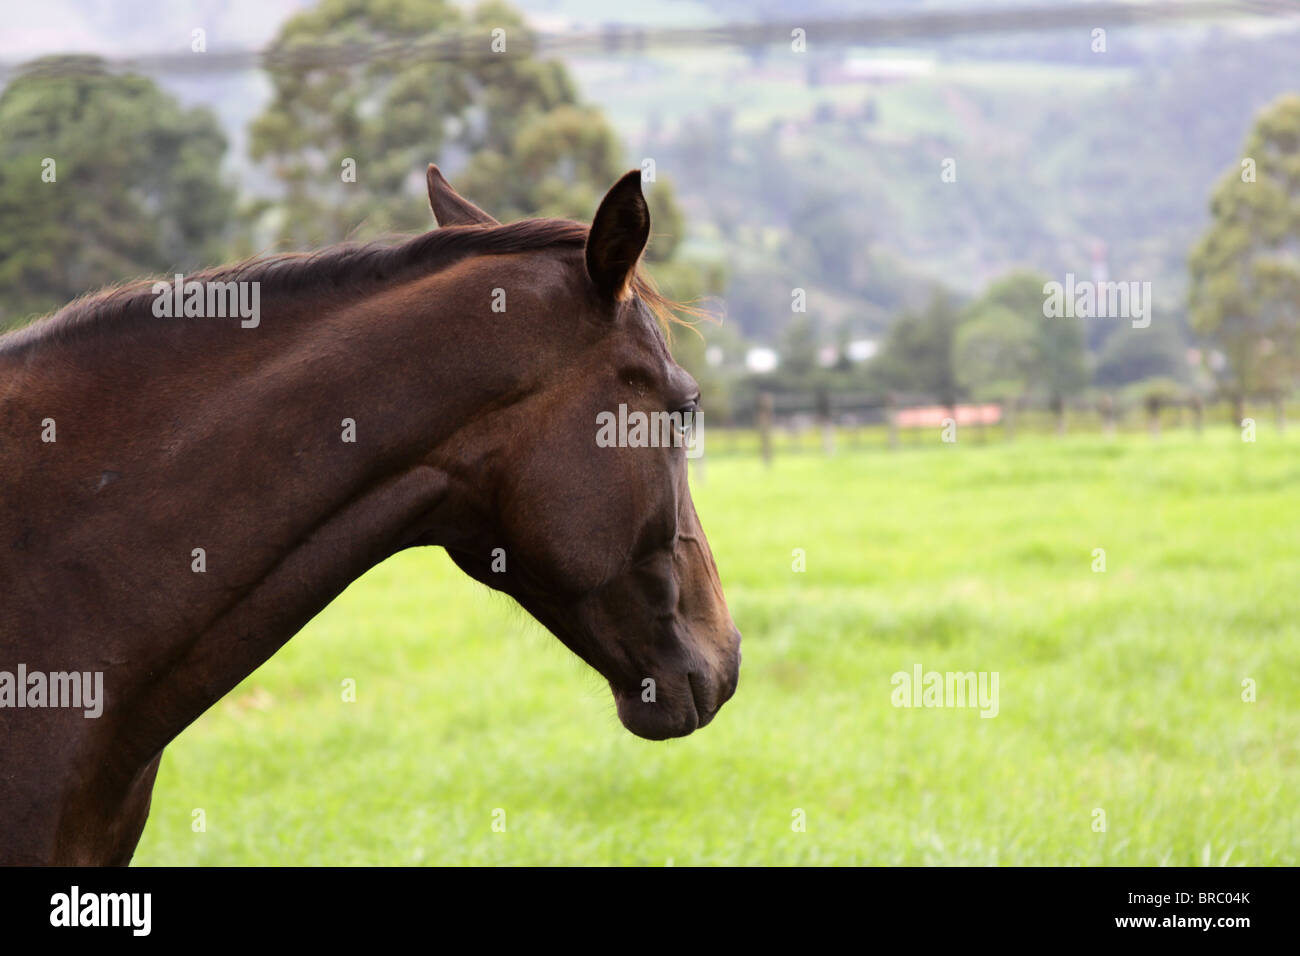 Thoroughbred horses head shots, feeding and standing against a green field. Stock Photo